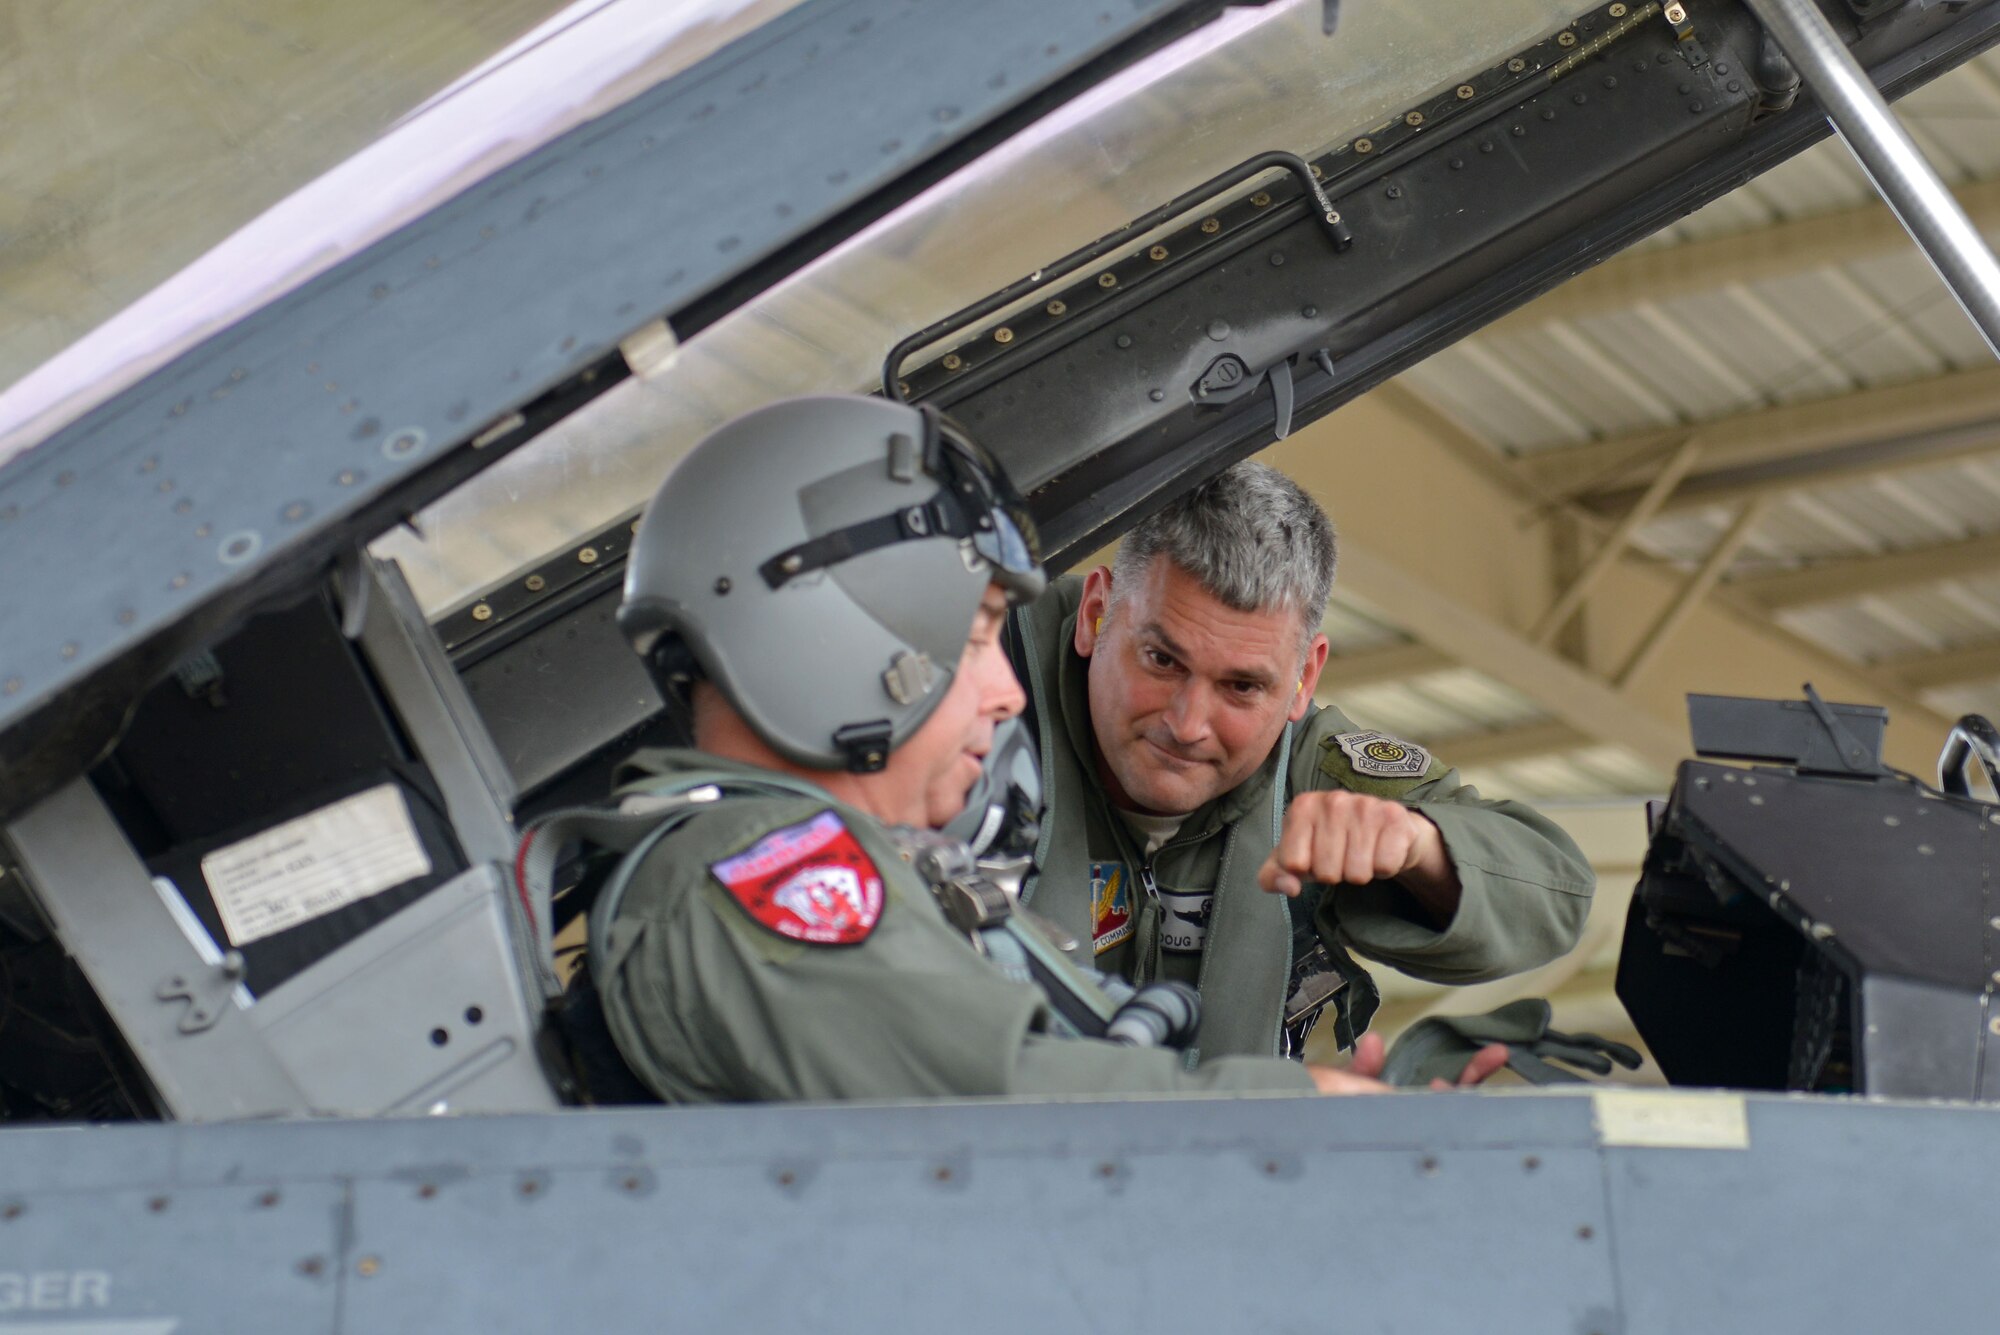 U.S. Air Force Col. Douglas Thies, 20th Operations Group commander, prepares to fist bump Col. David Vaclavik, 20th Mission Support Group commander, prior to a familiarization flight at Shaw Air Force Base, S.C., May 30, 2017. Thies flew Vaclavik, who has been his friend since college, on a familiarization flight training mission in an F-16D Fighting Falcon. (U.S. Air Force photo by Airman 1st Class Destinee Sweeney)